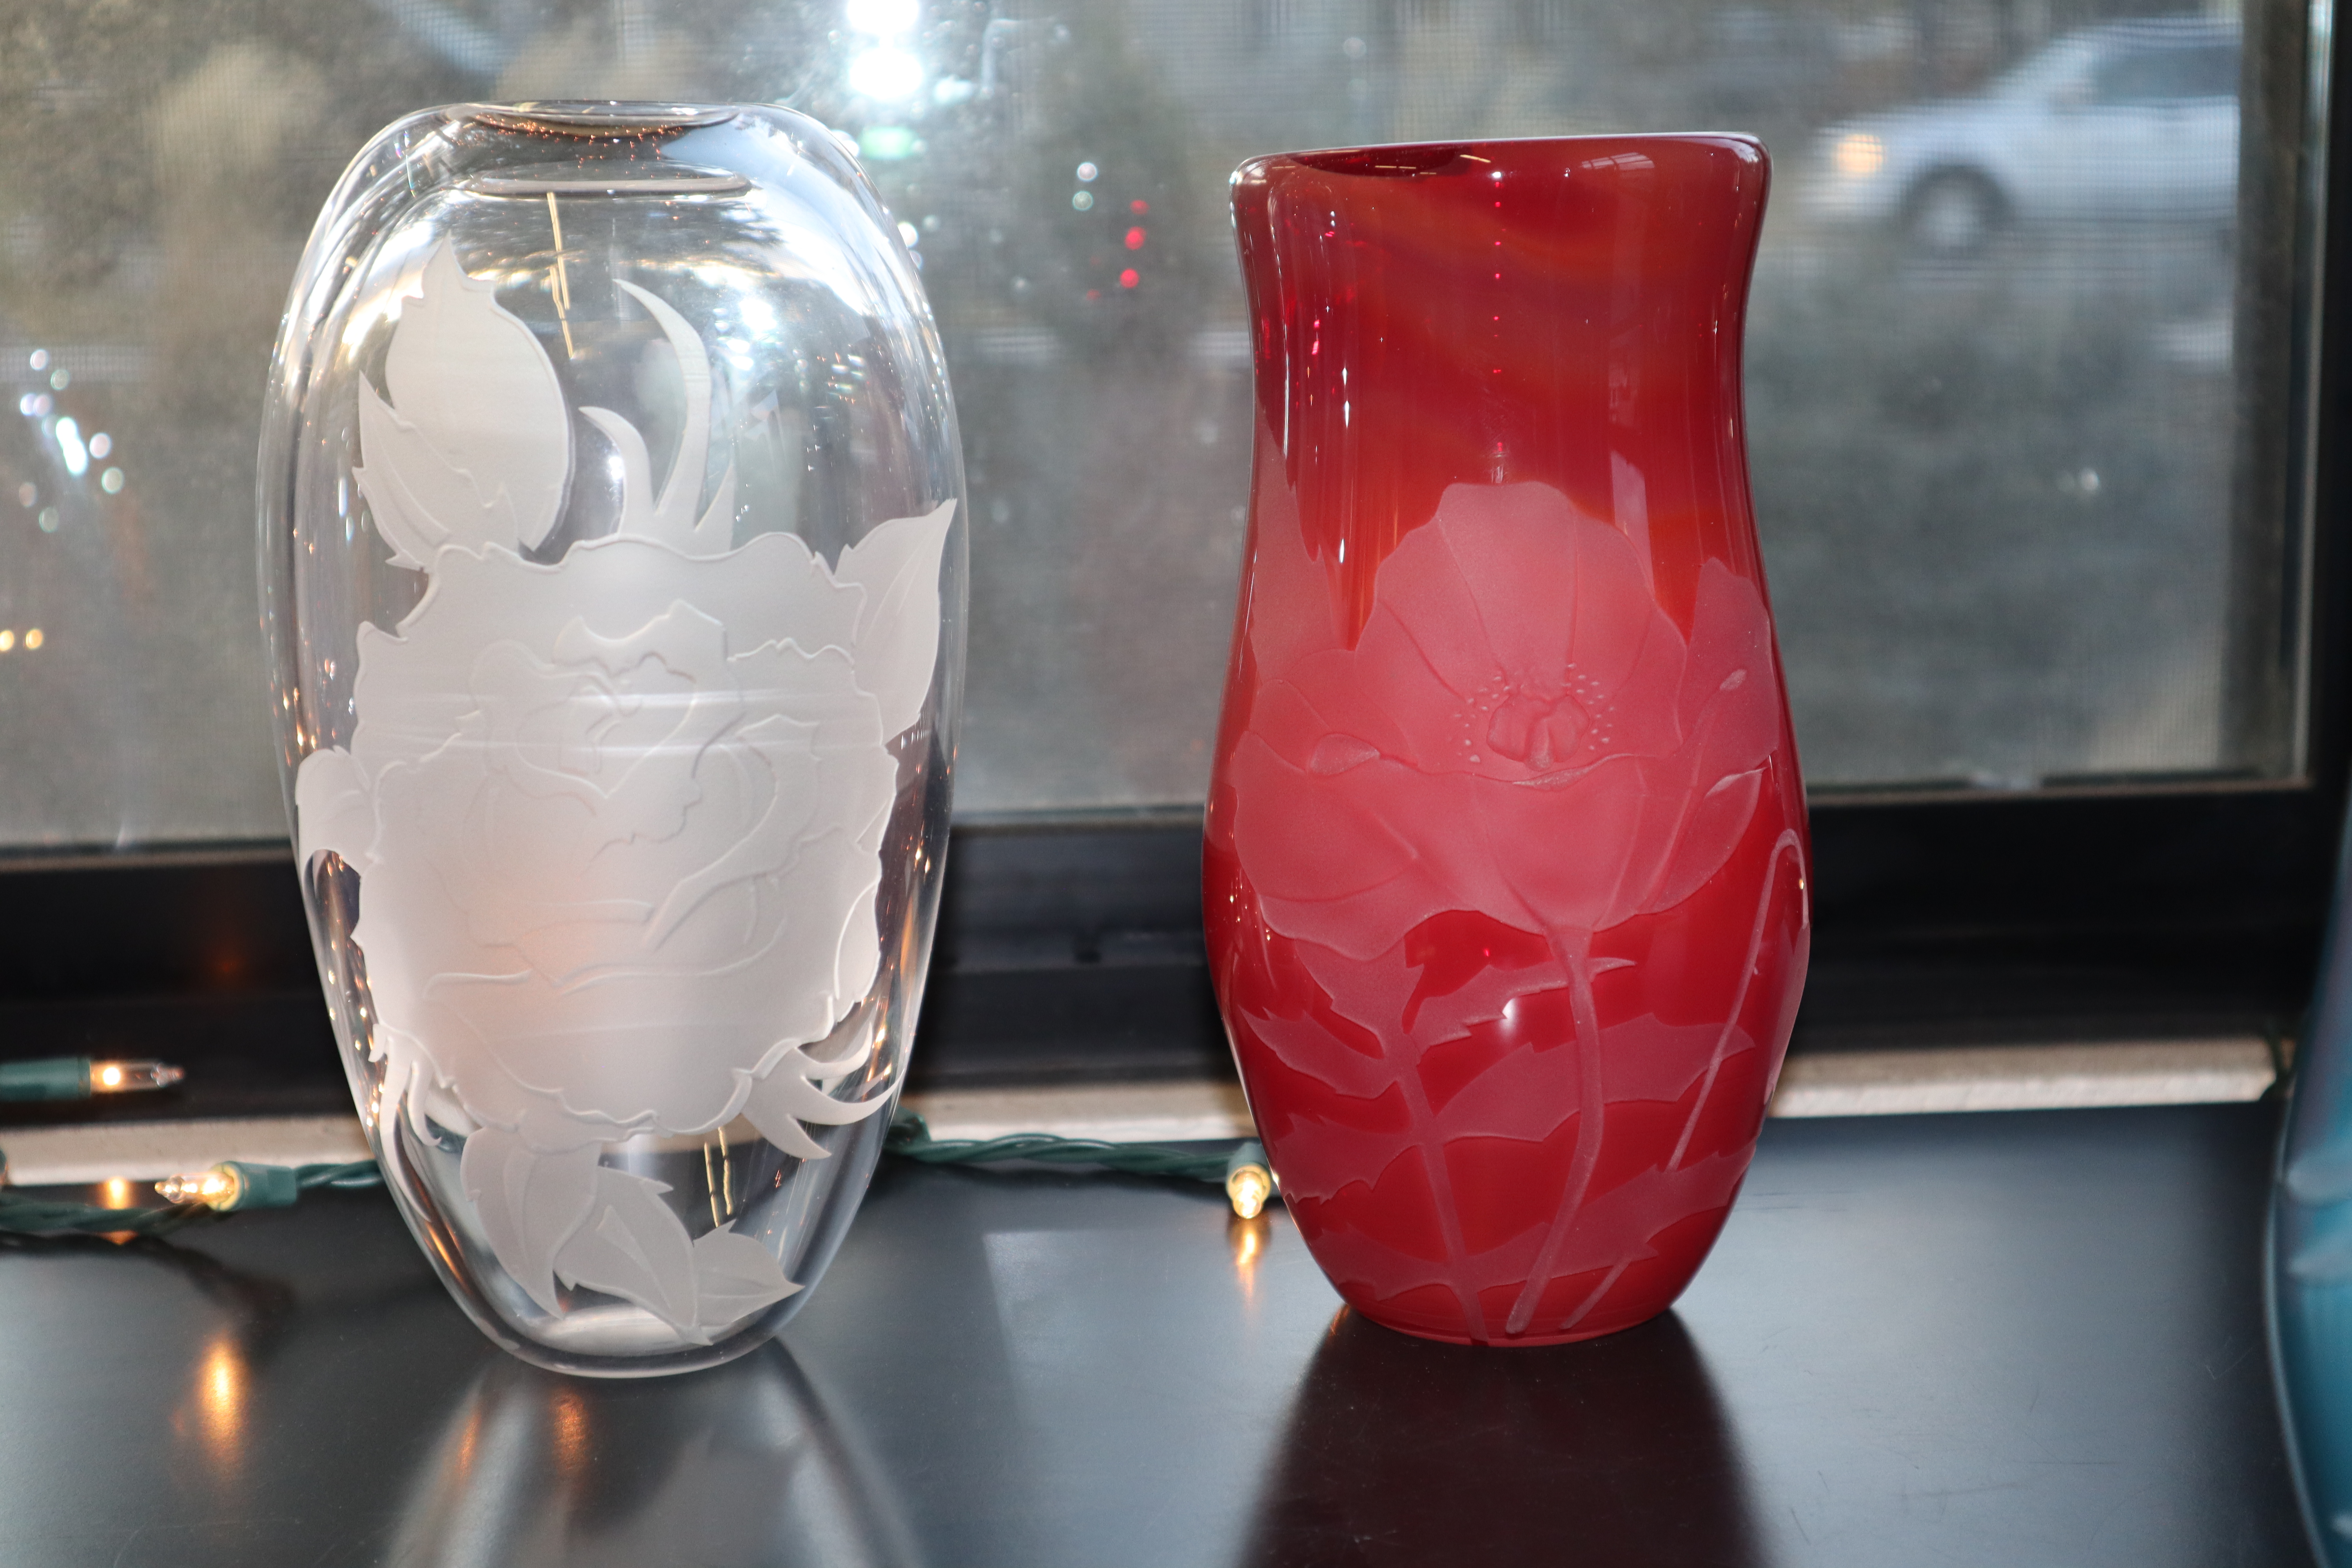 Etched Rose and Poppy Vases